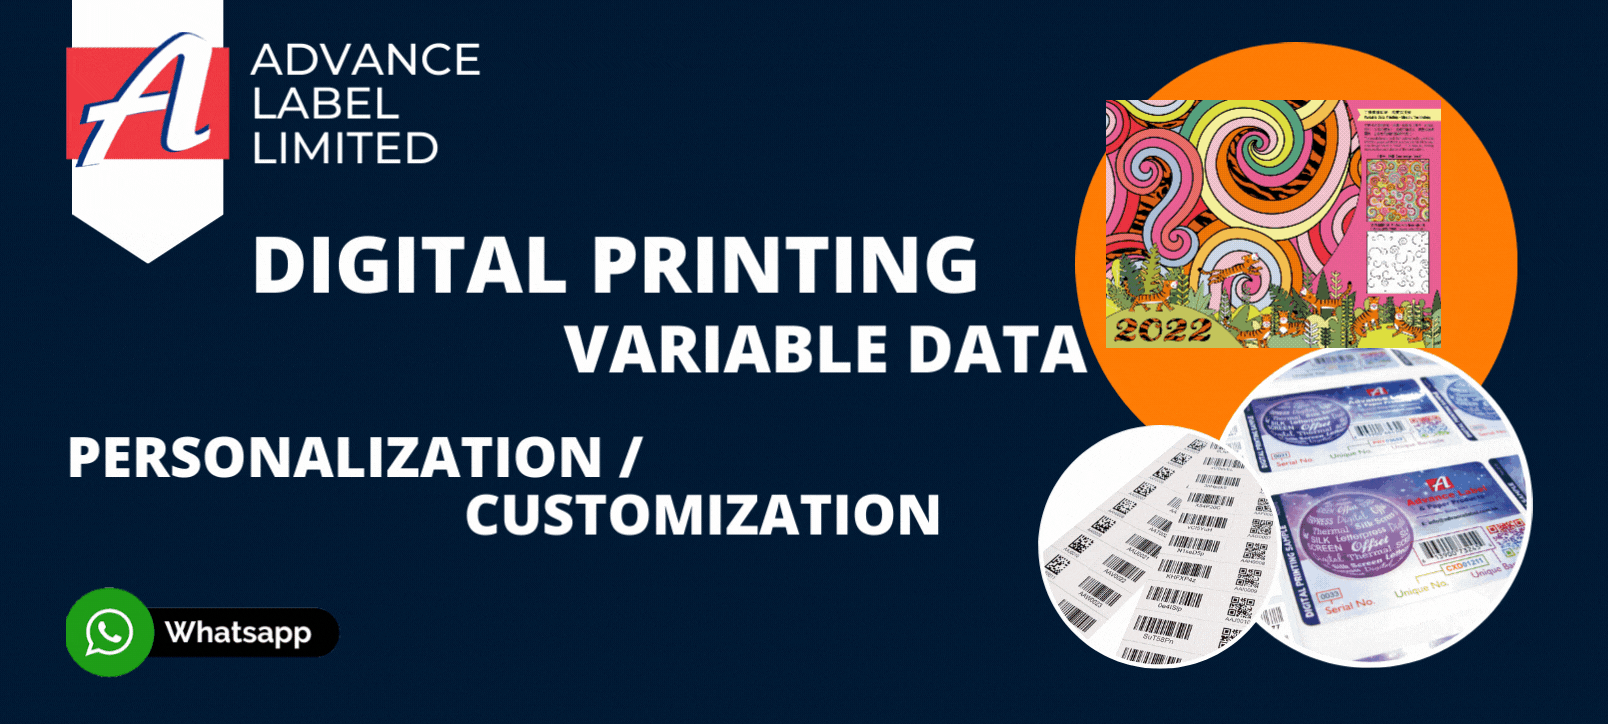 Digital Printing Variable Data Processing for Personalized and Customized Products